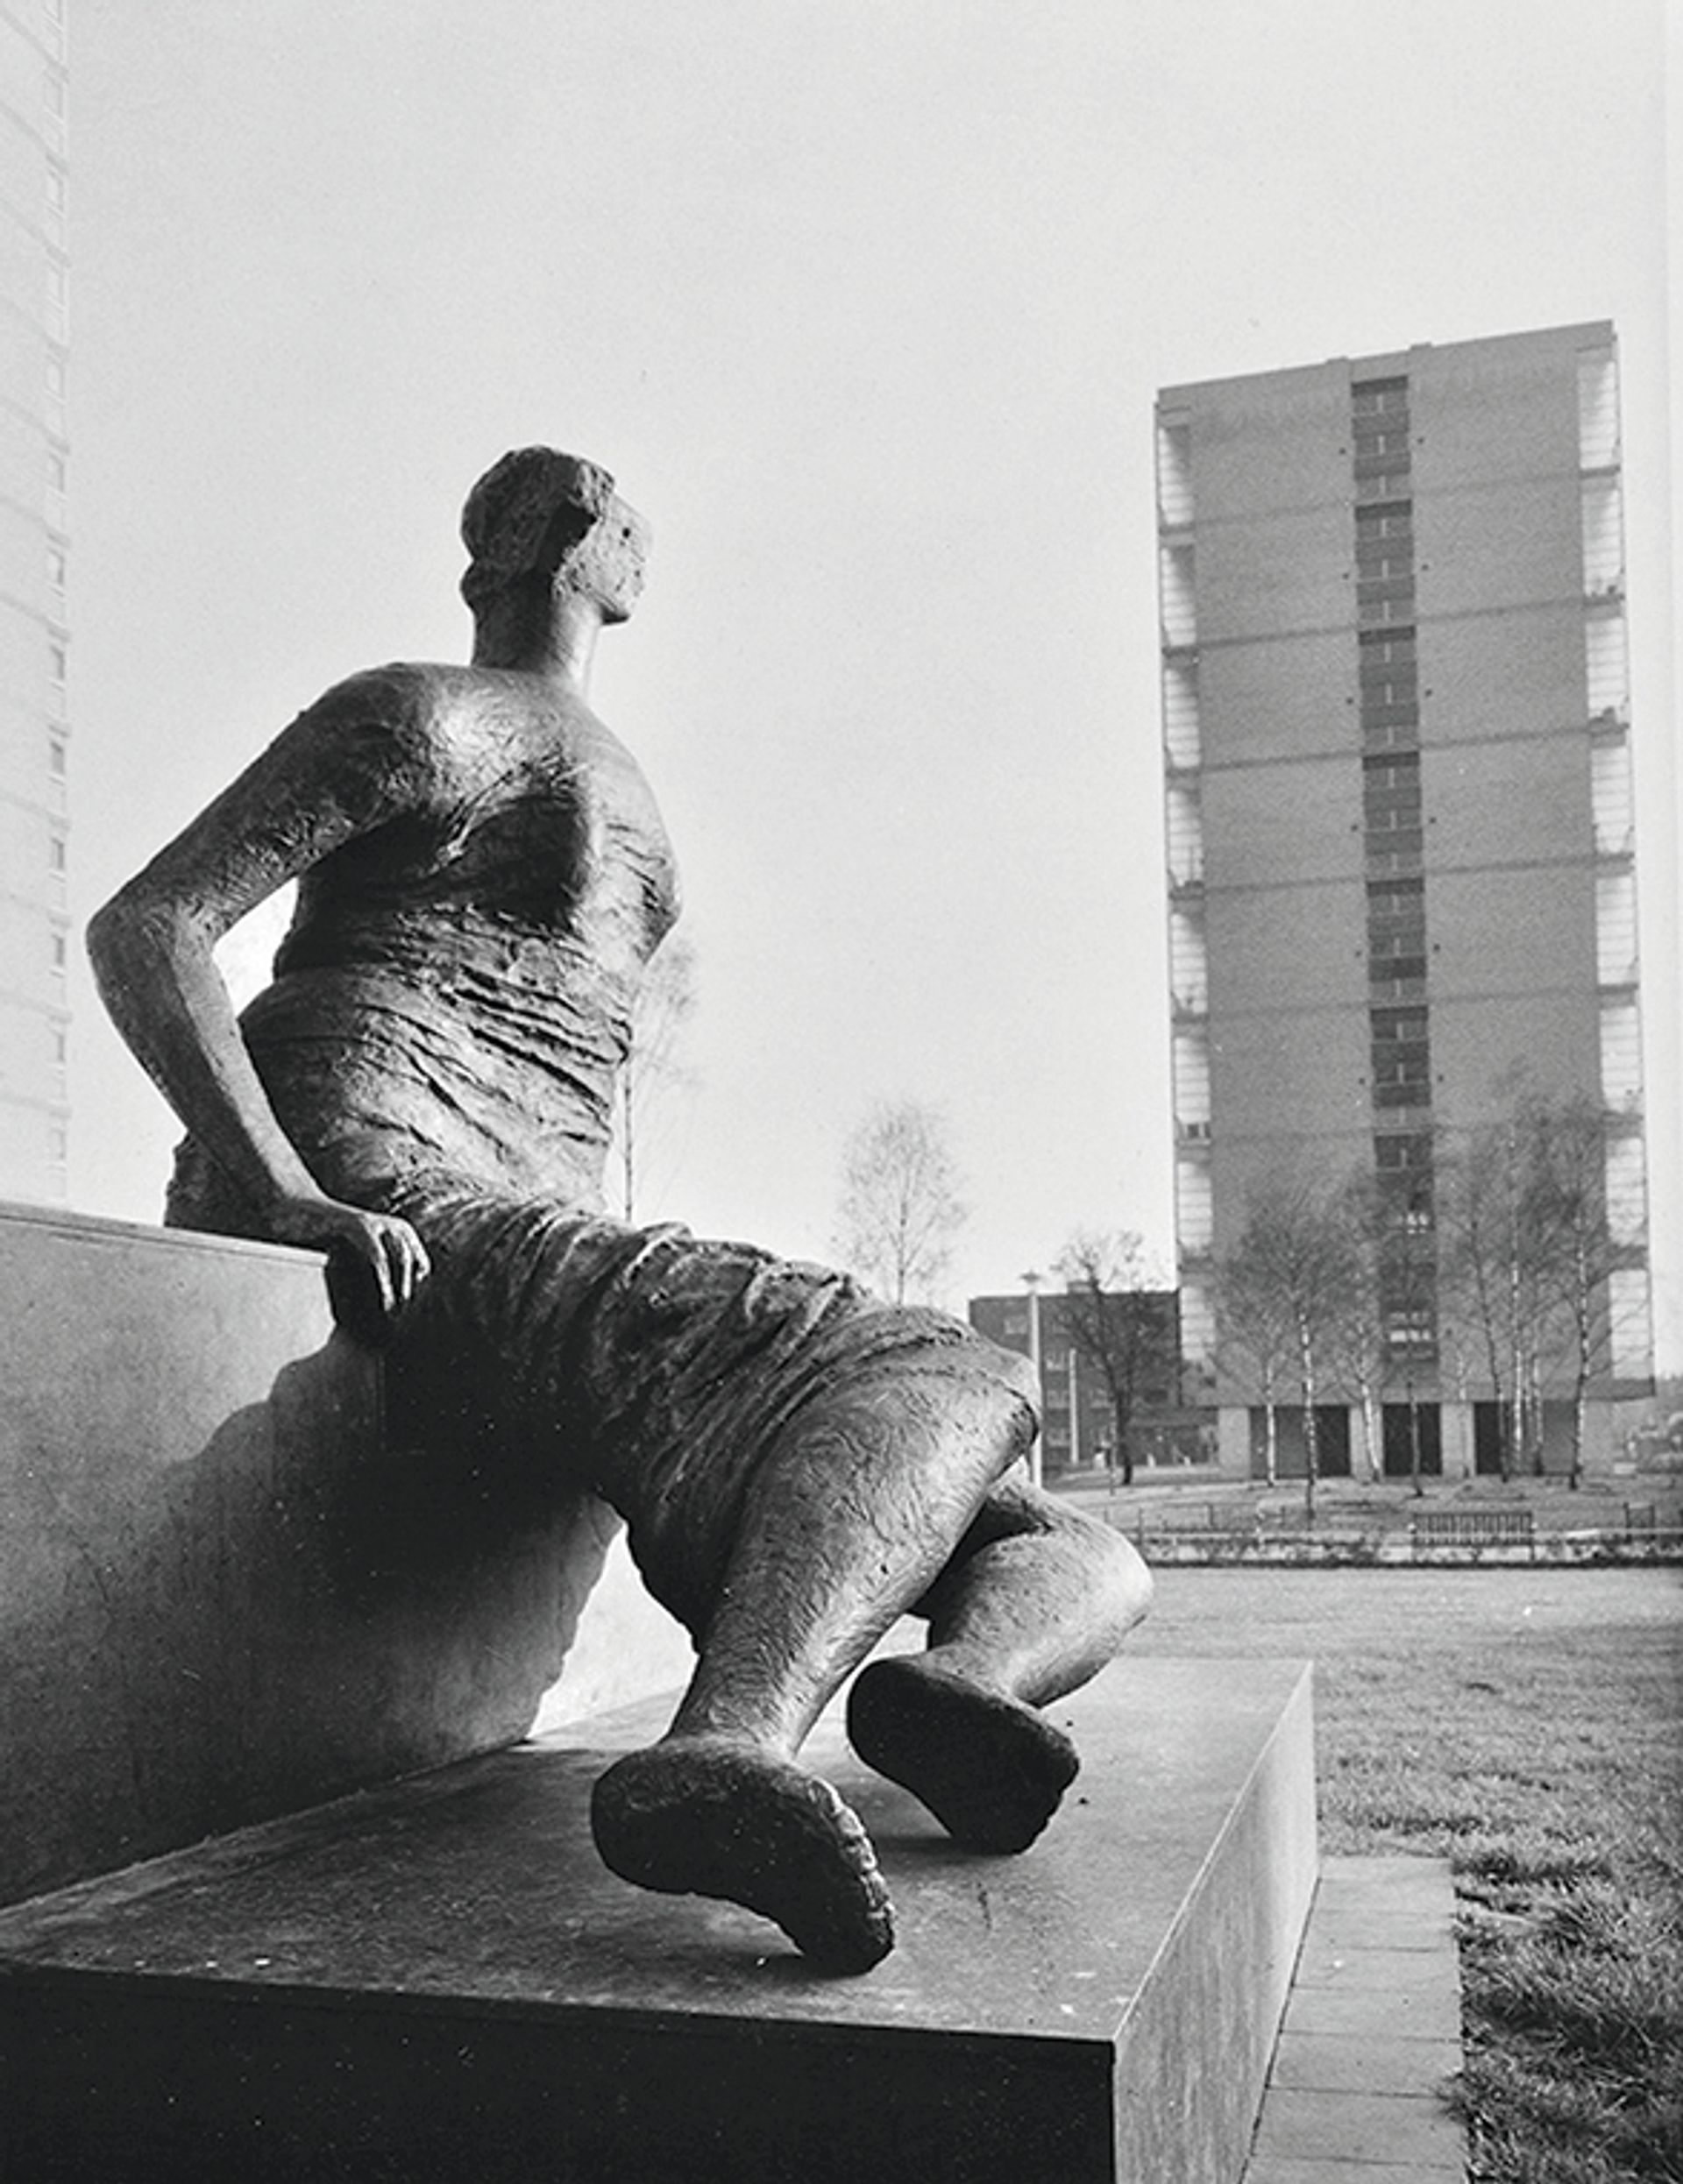 Henry Moore's "Old Flo" in its original position on the Stifford Estate in 1962 © The Henry Moore Foundation. All Rights Reserved, DACS / www.henry-moore.org 2022. Courtesy of London Metropolitan Archives City of London Corporation